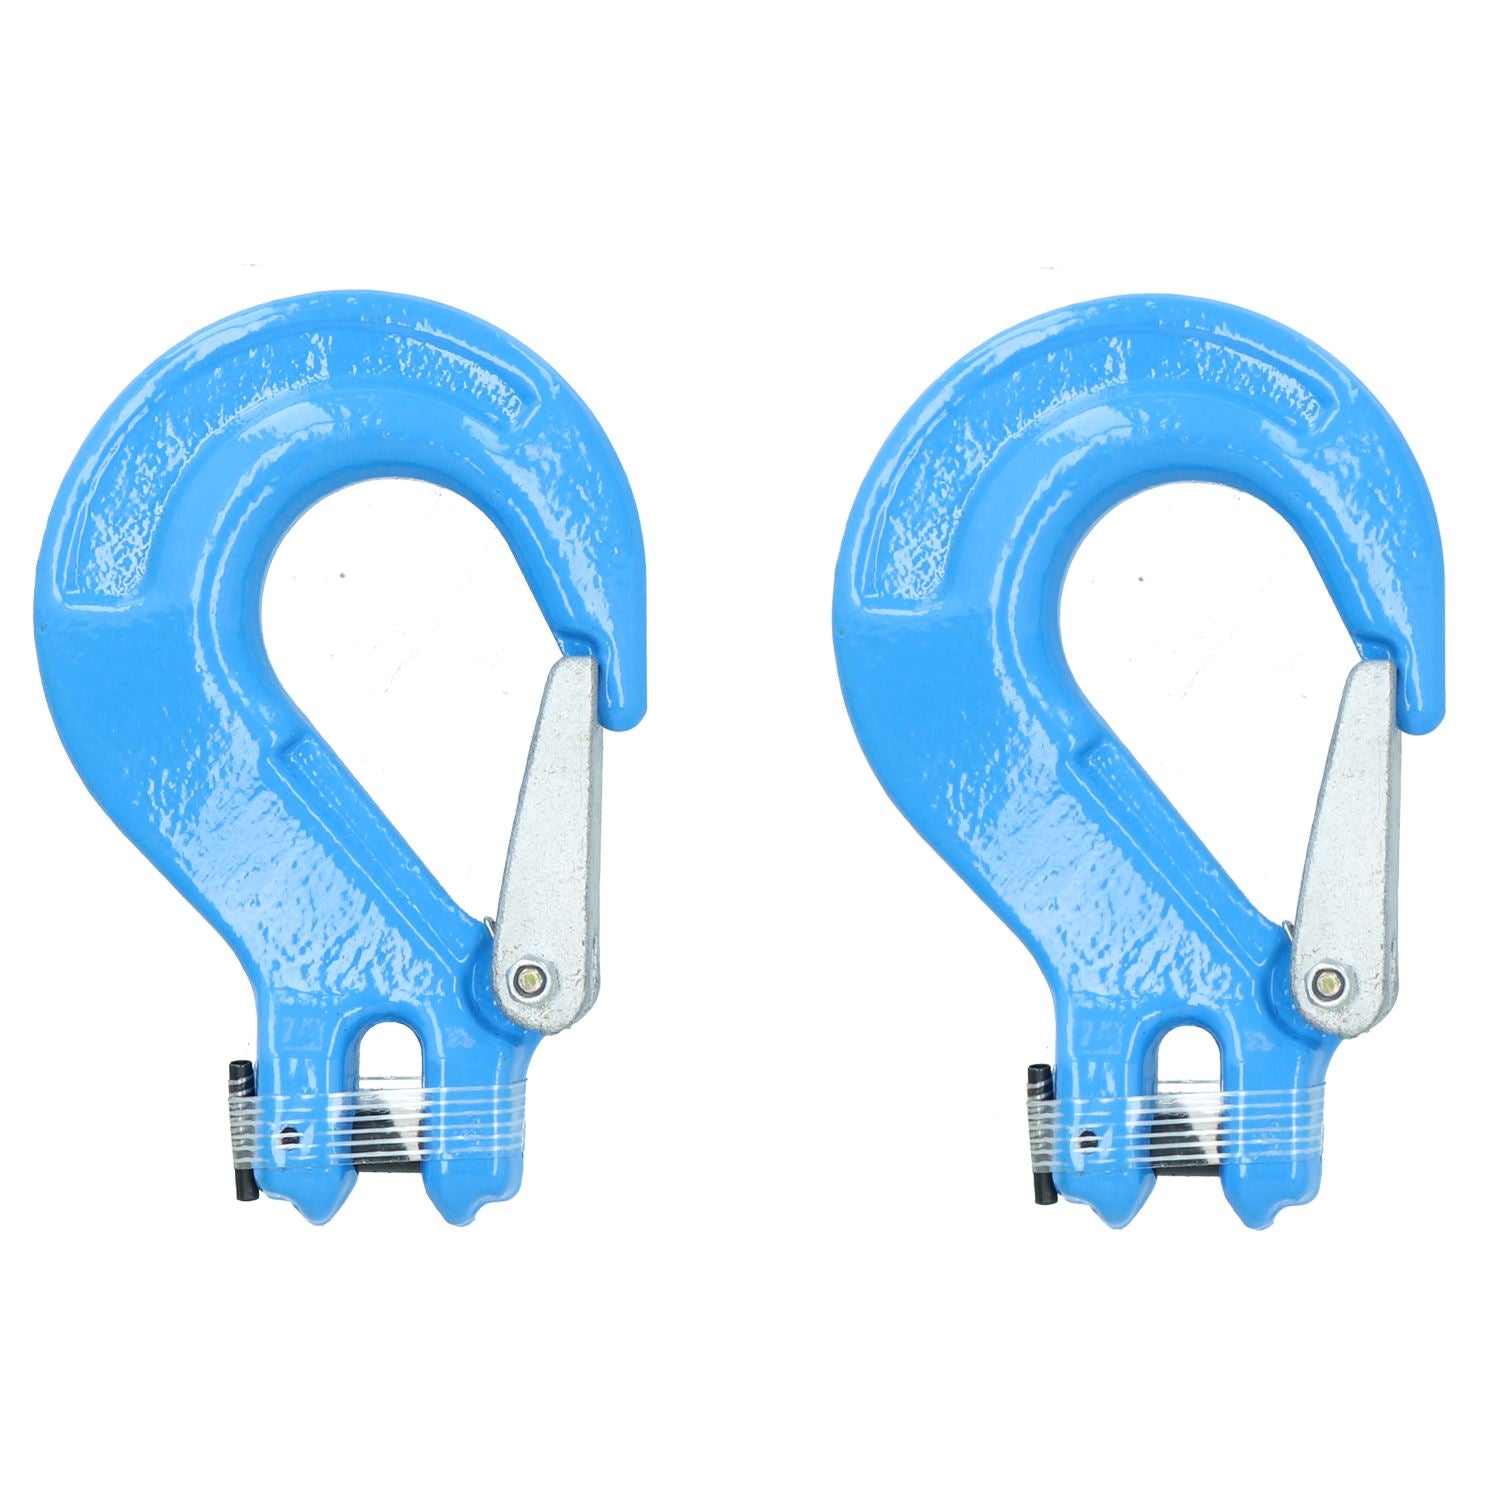 Clevis Sling Hook Safety Catch Max Lifting Capacity 2 Ton For 8mm Chain 2pk